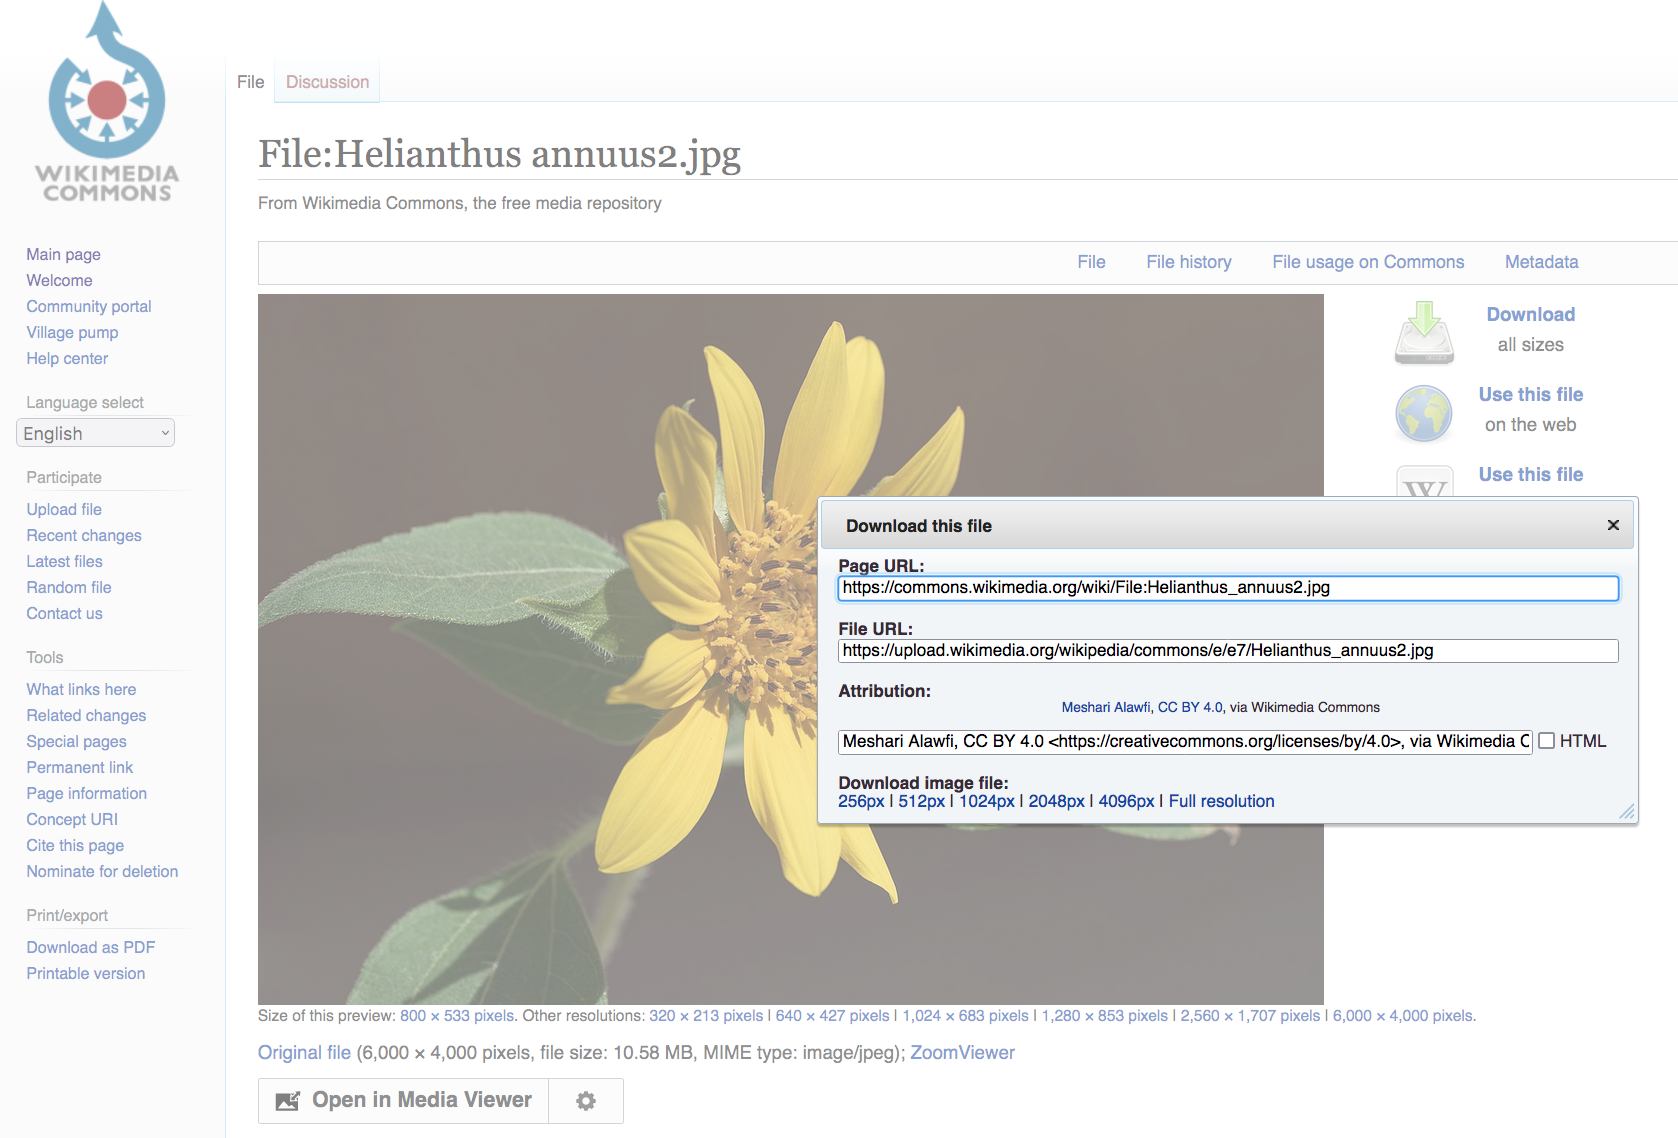 dialog box for downloads on Wikimedia Commons